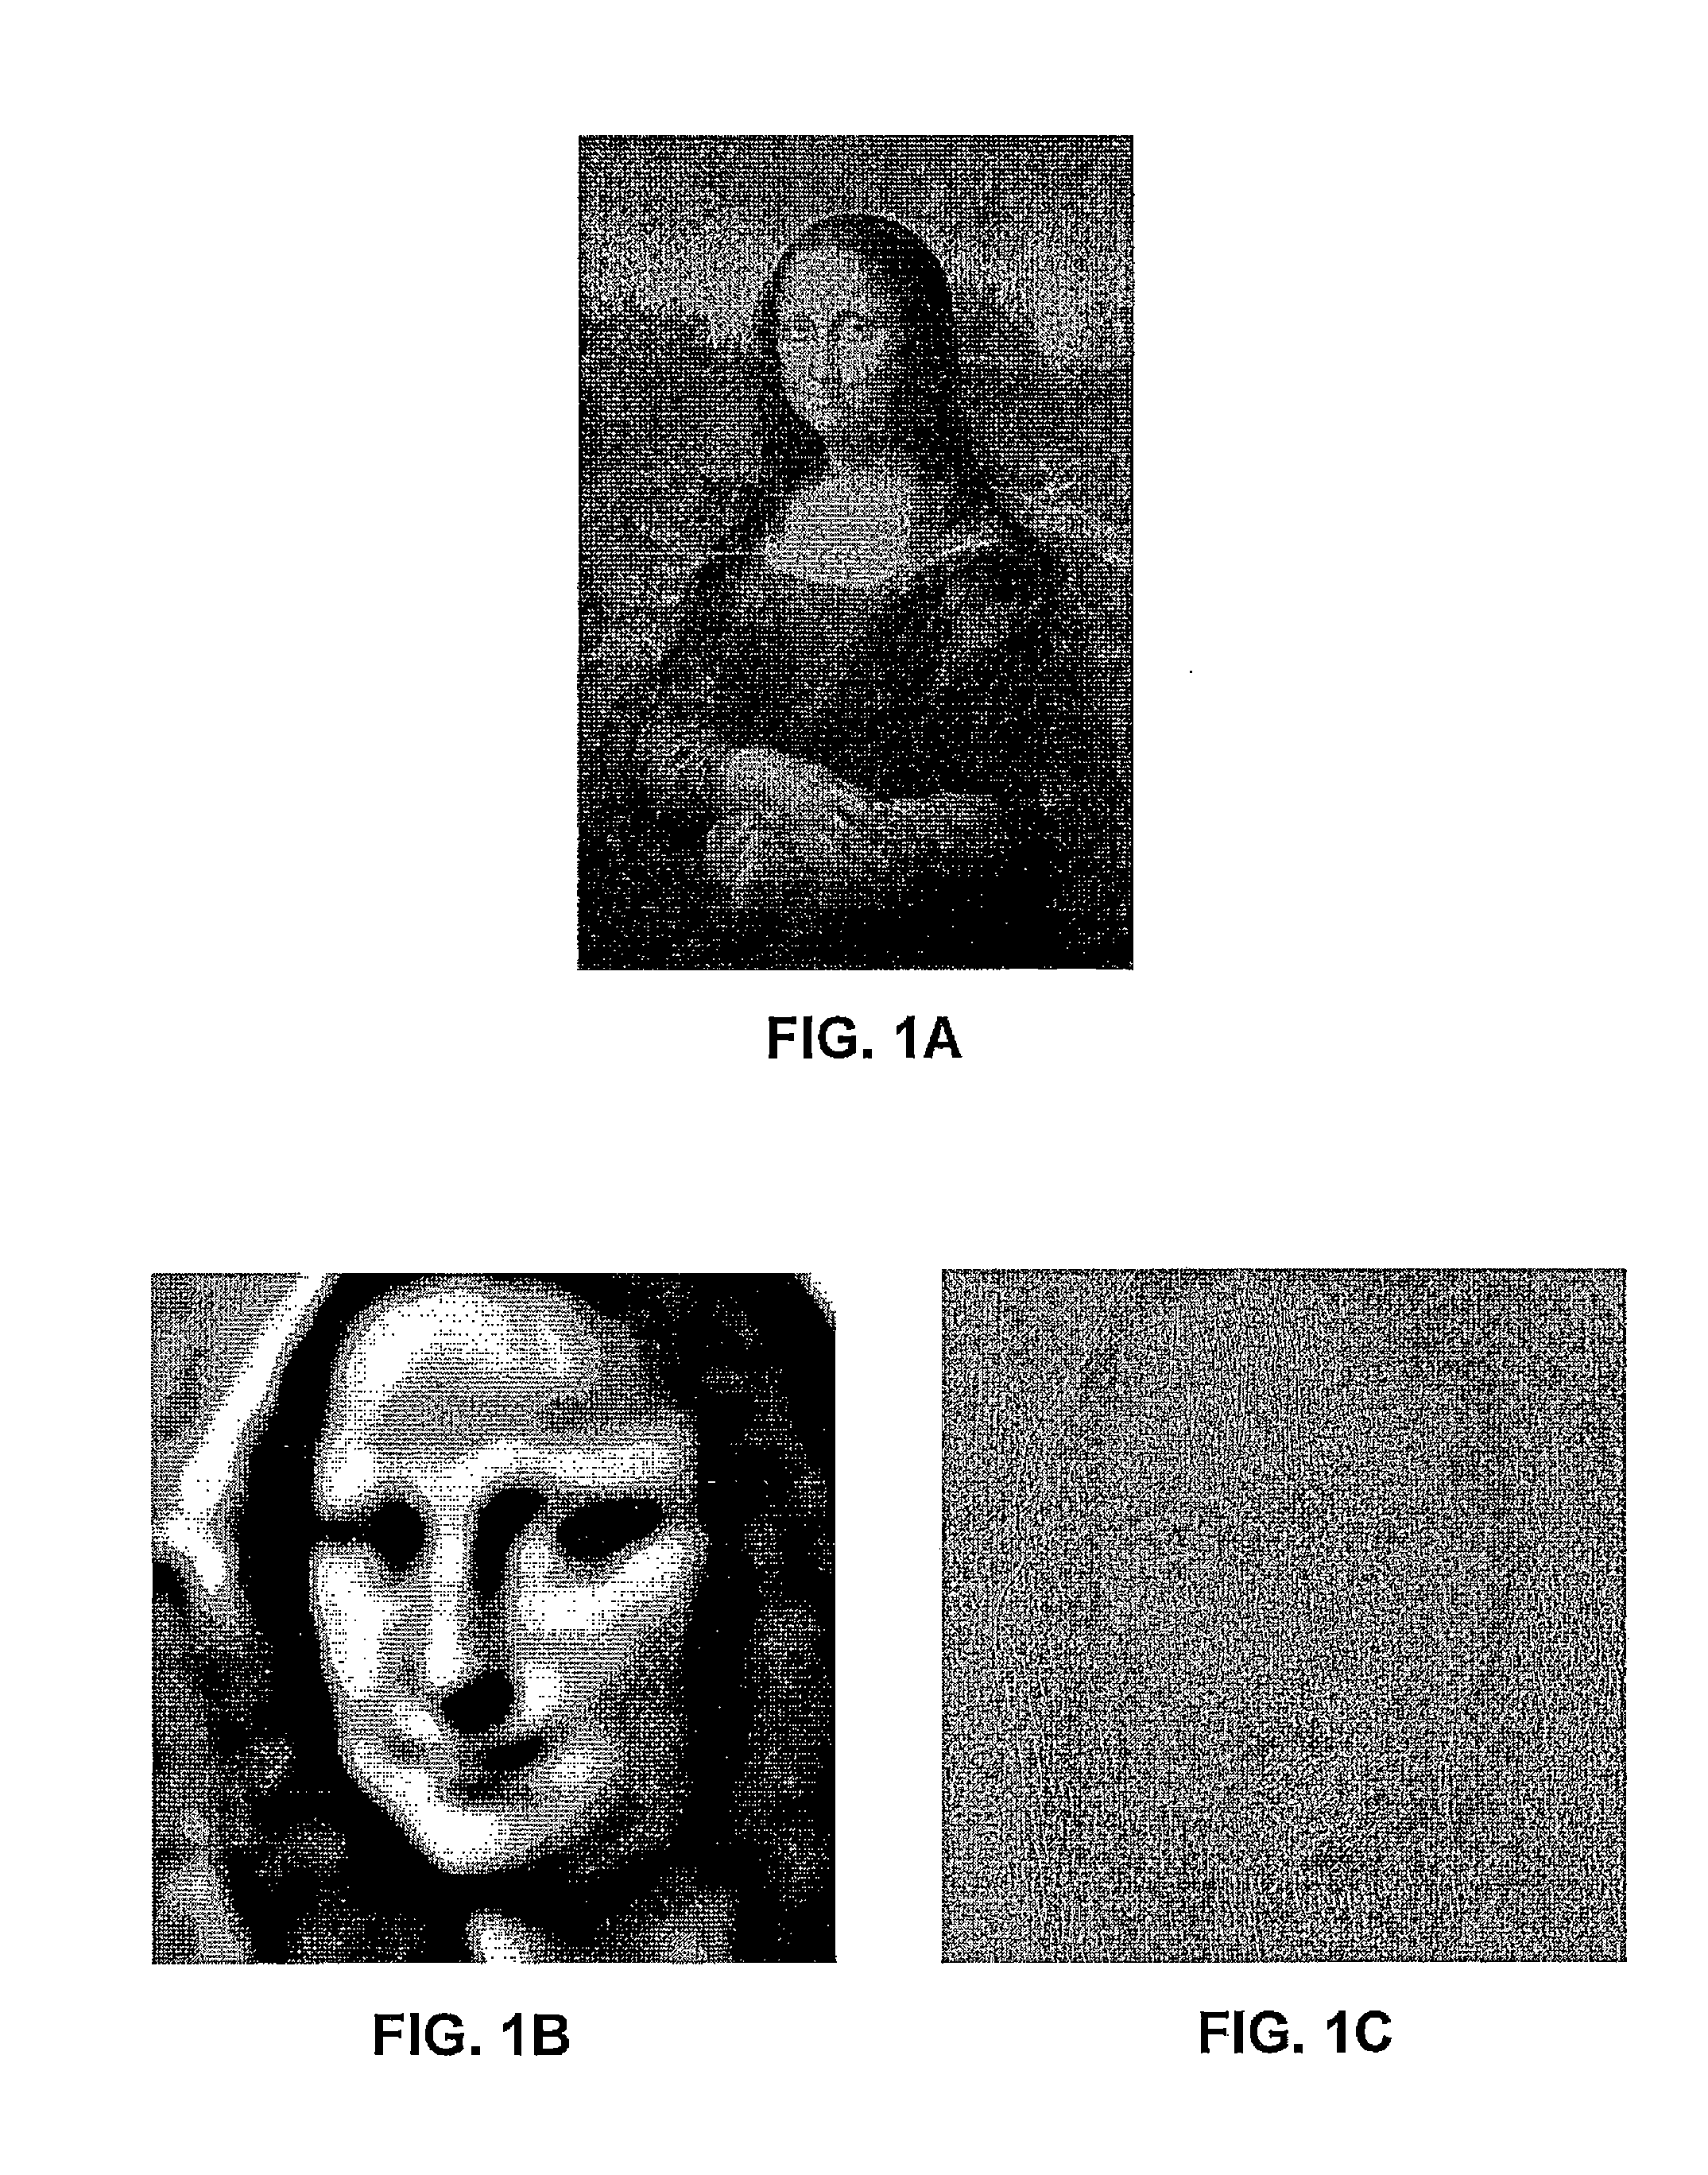 Method and System for Analog/Digital Image Simplification and Stylization